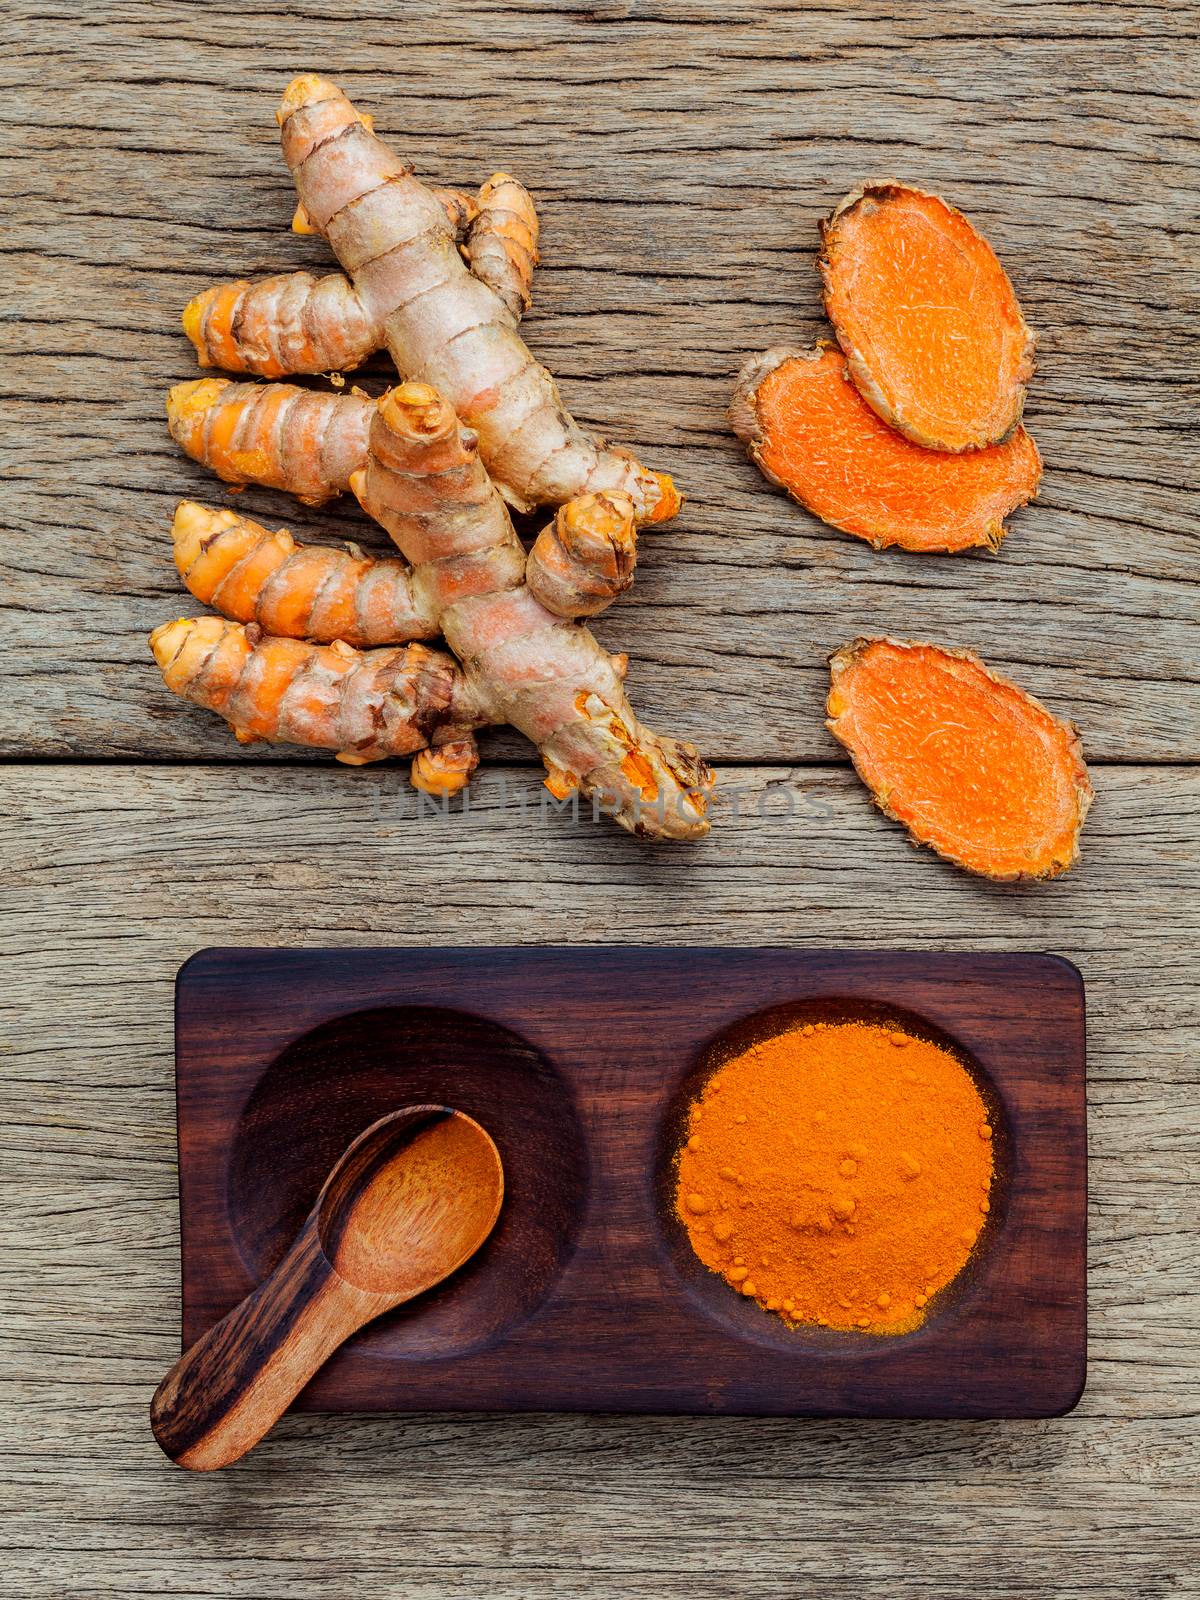 Alternative ingredients for skin care. Homemade scrub curcumin powder and curcumin roots set up on old wooden background.